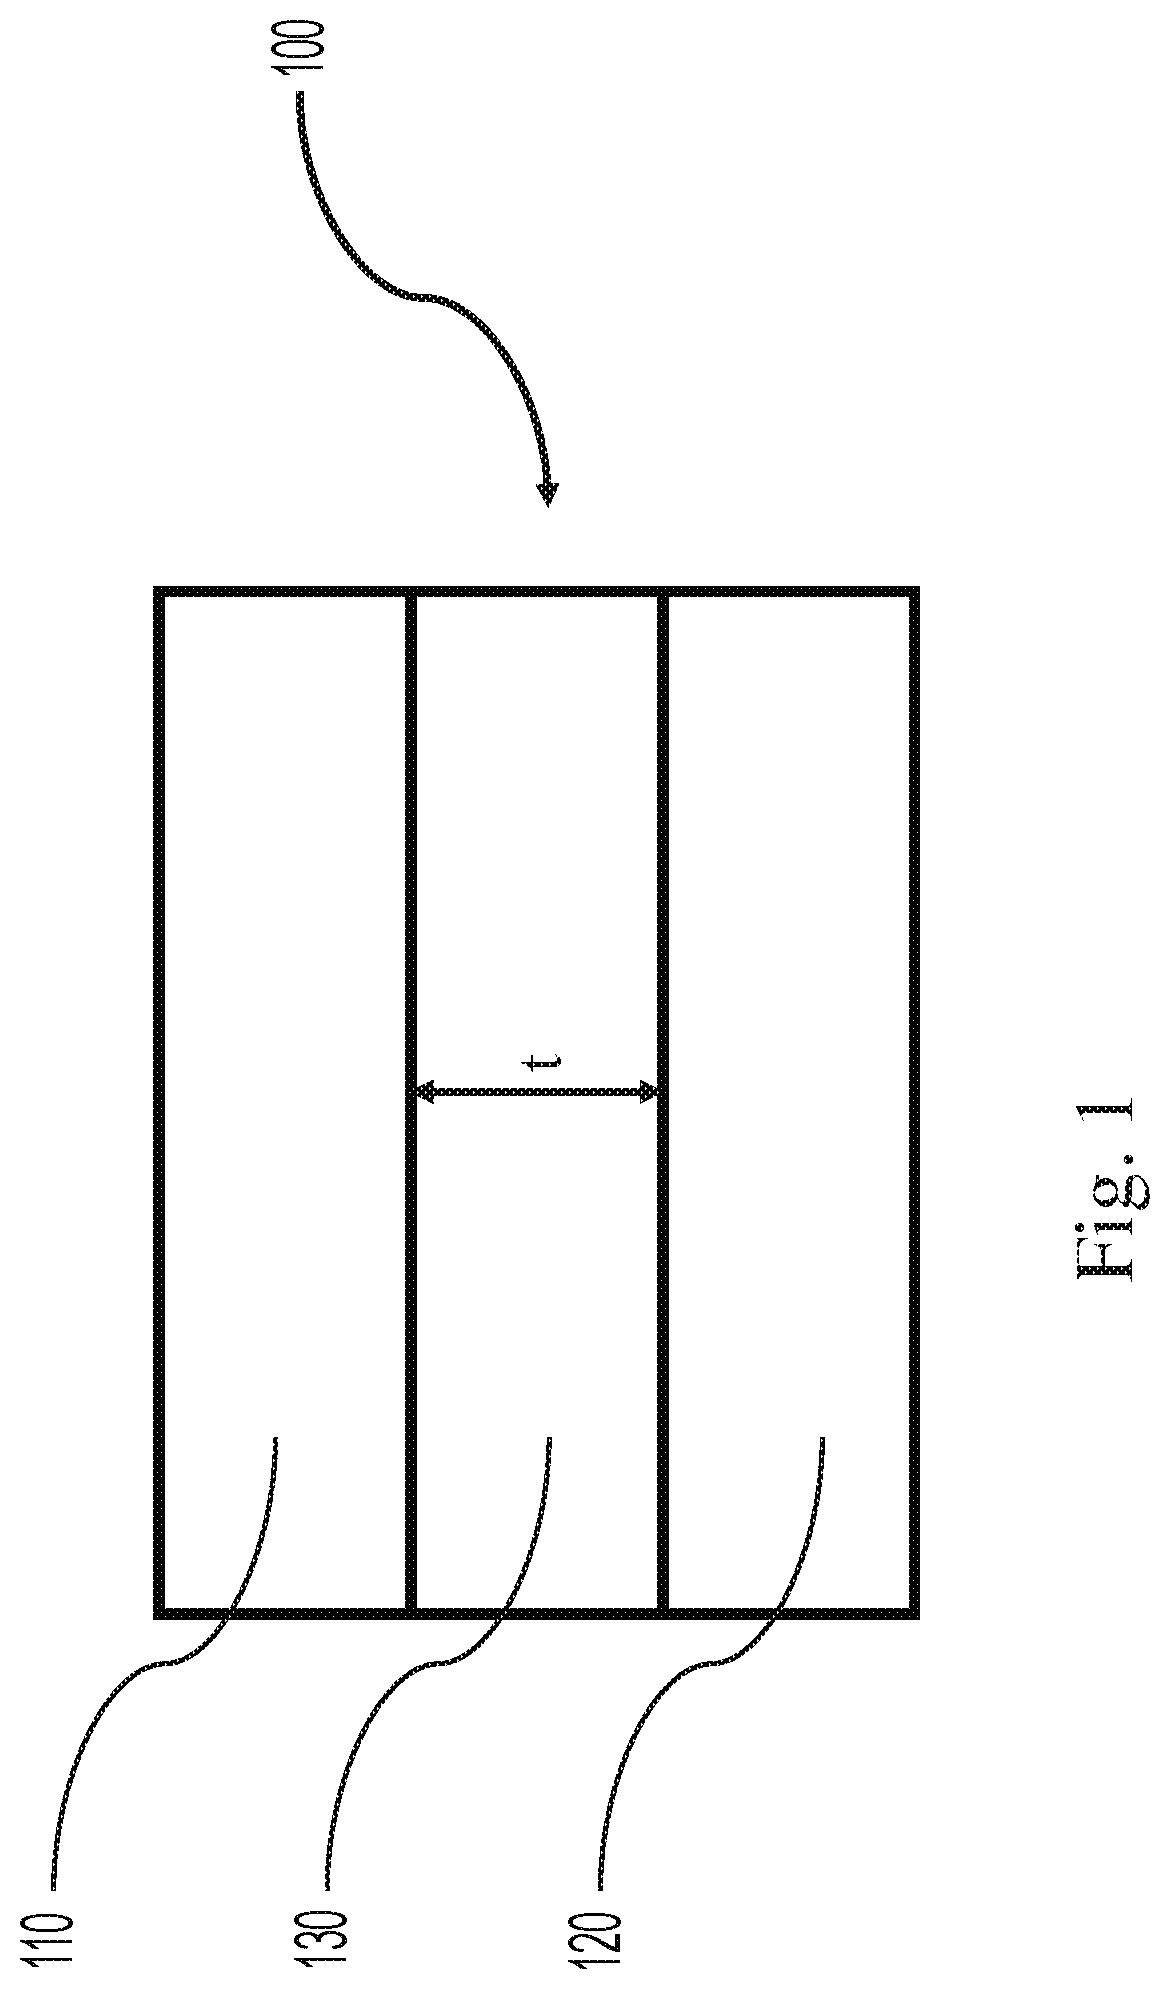 Multilayer edible products comprising a barrier layer